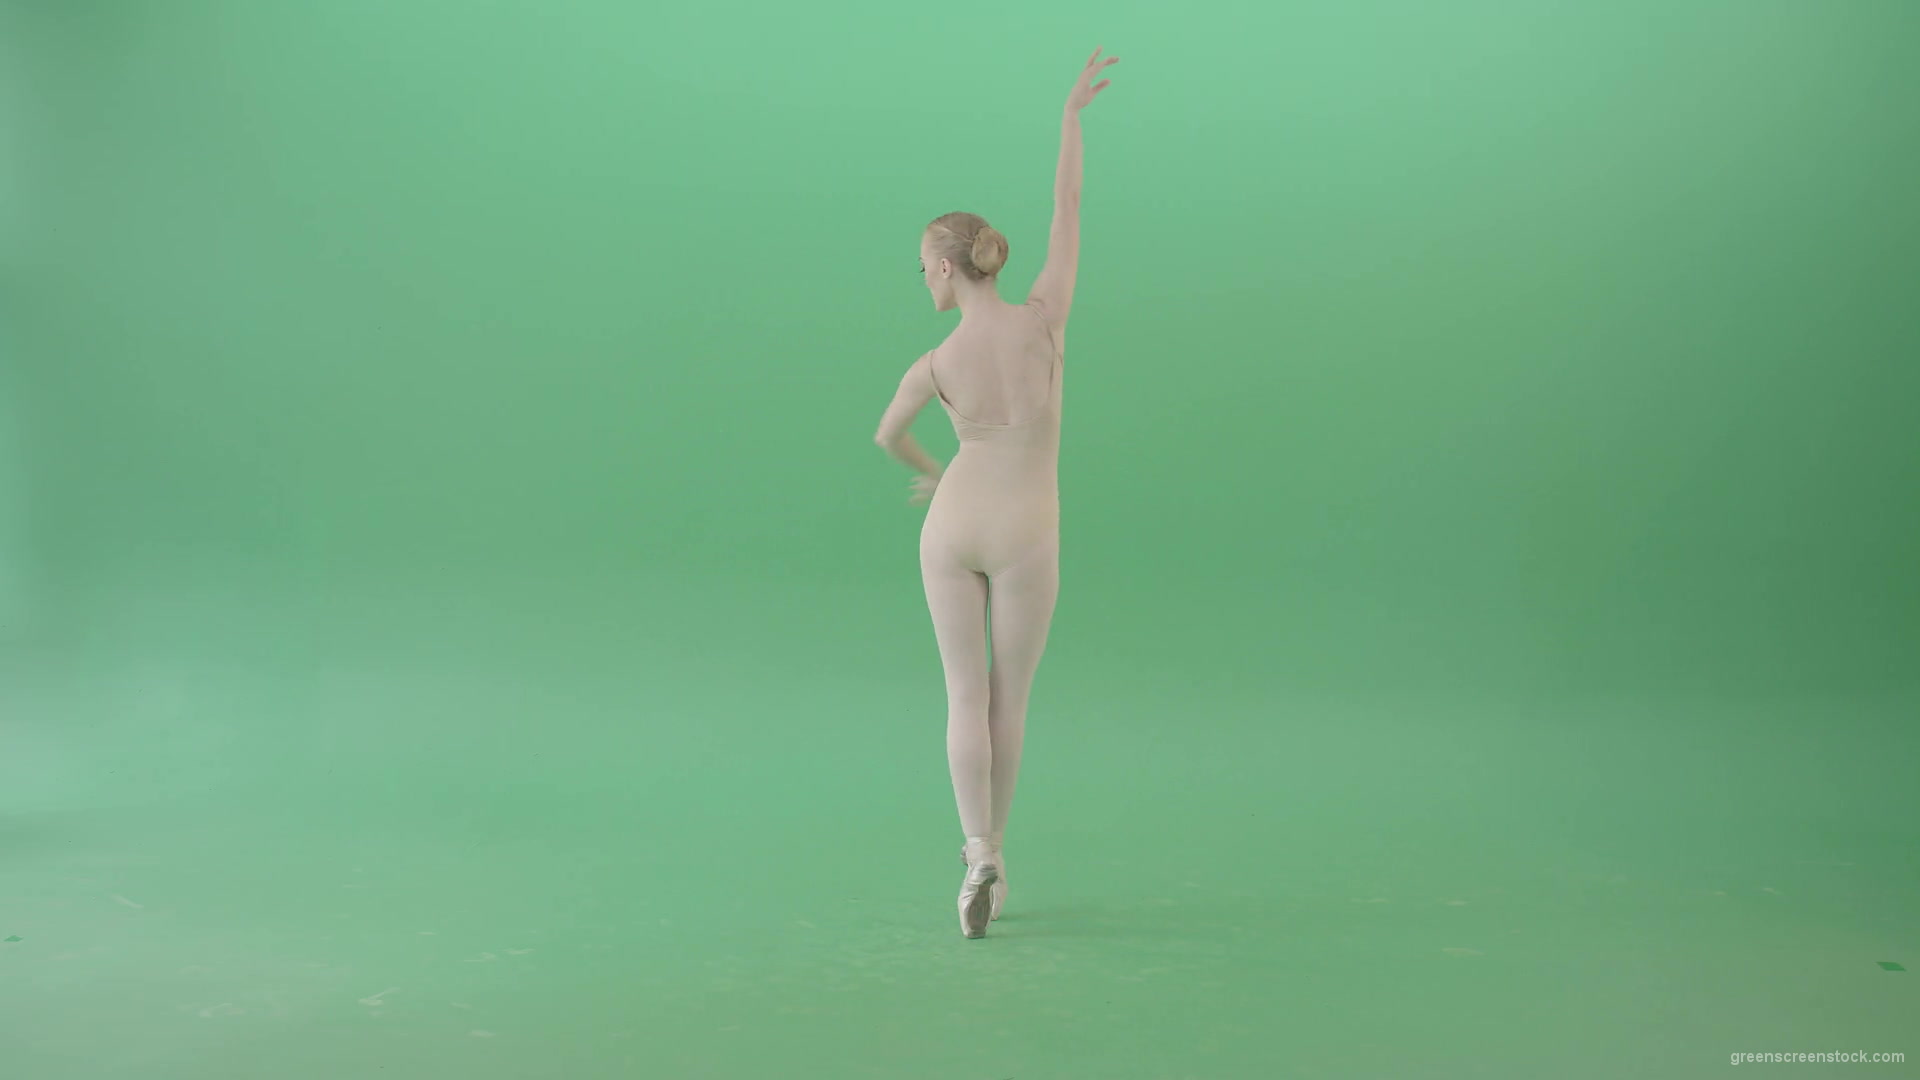 Ballet-dancer-woman-spinning-in-body-color-outfit-isolated-on-green-screen-4K-Video-Footage-1920_005 Green Screen Stock